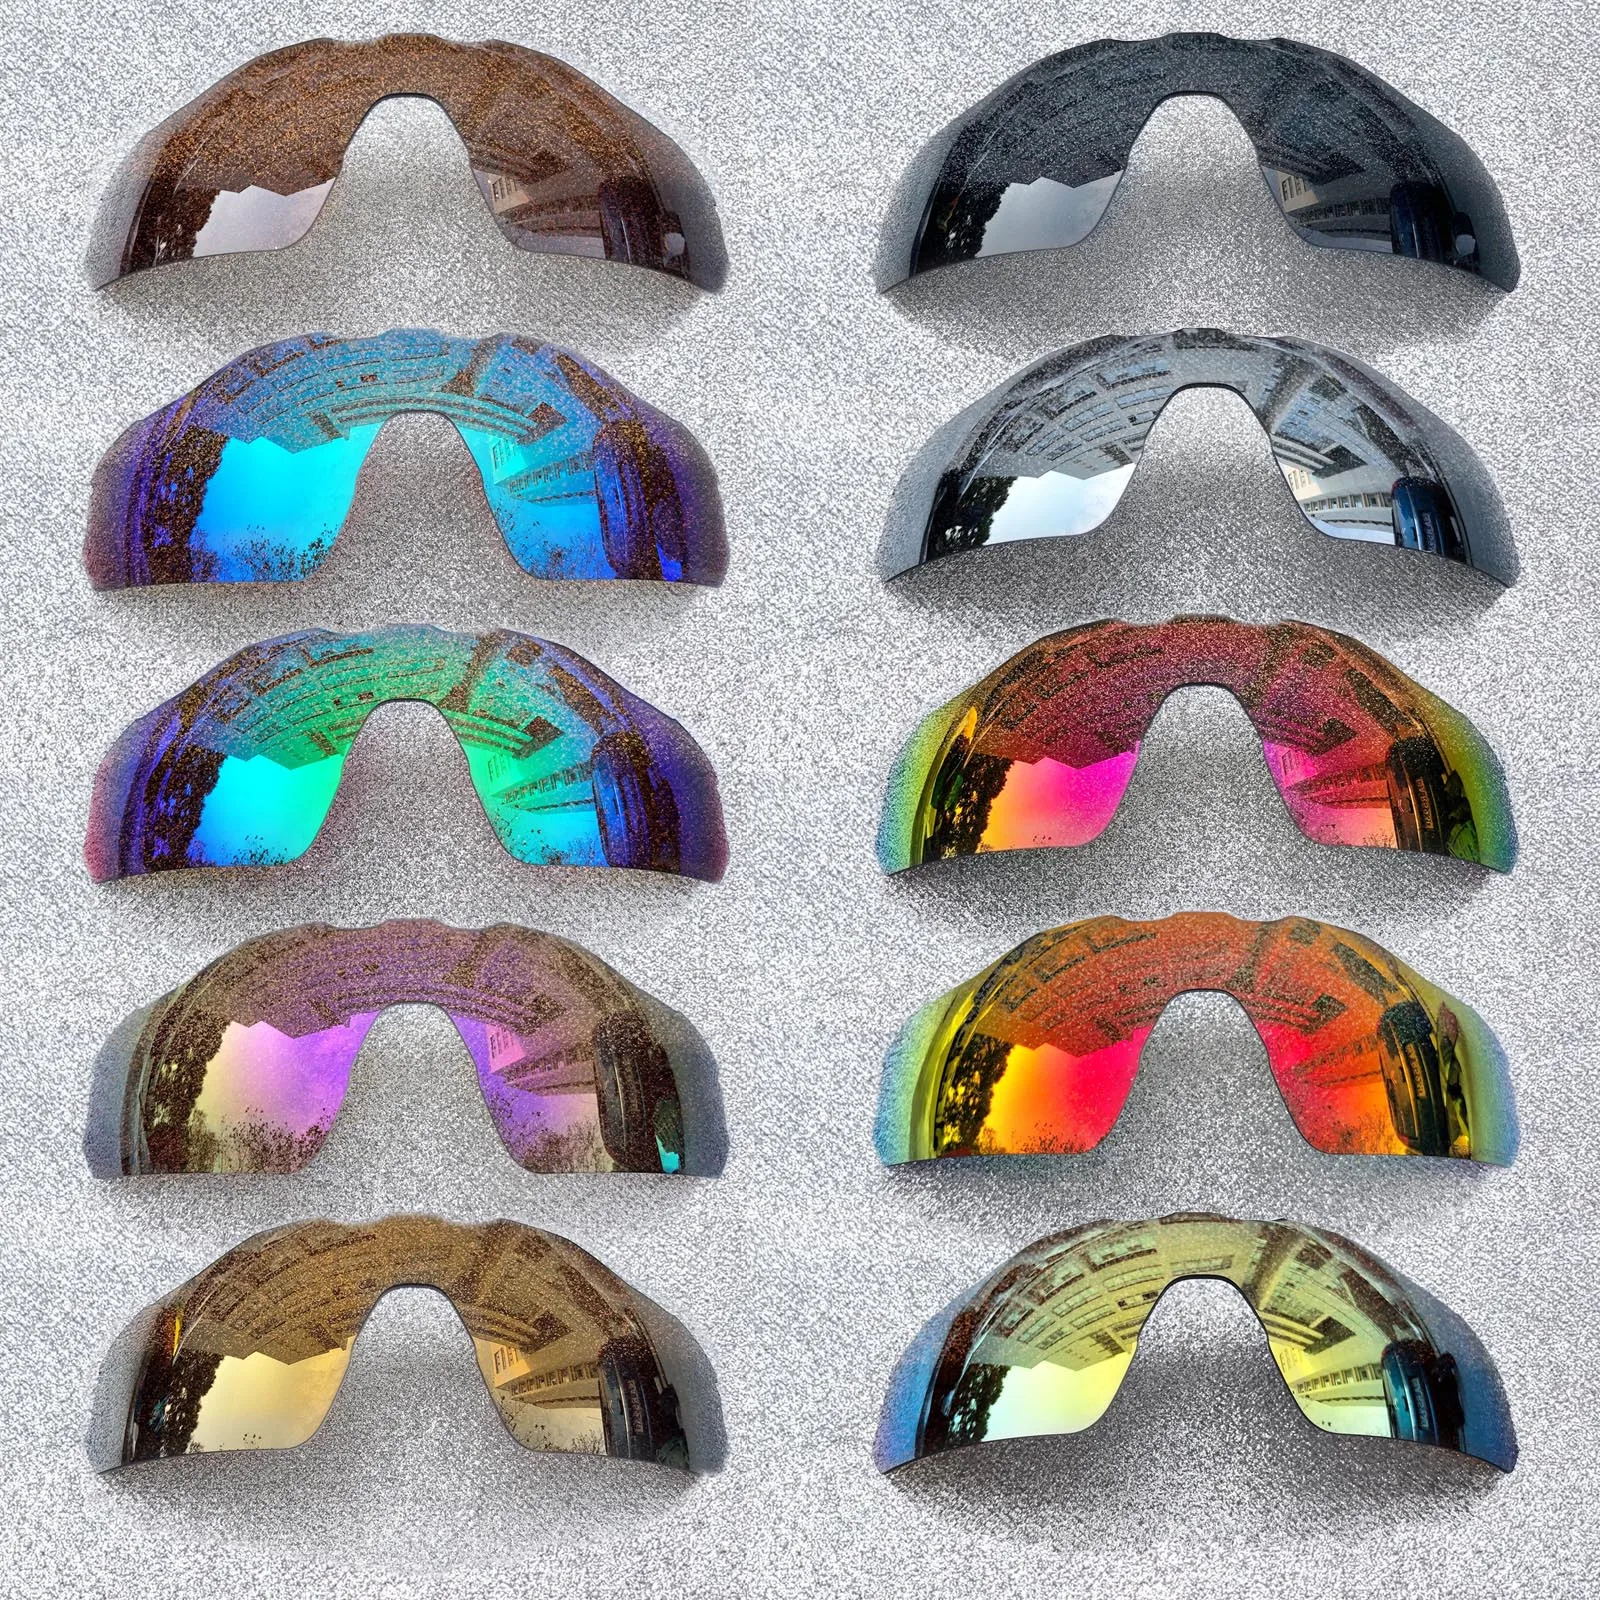 

HDTAC Polarized Replacement Lenses For-Oakley Si M Frame 3.0 OO9146 Sunglasses Multicolor Options